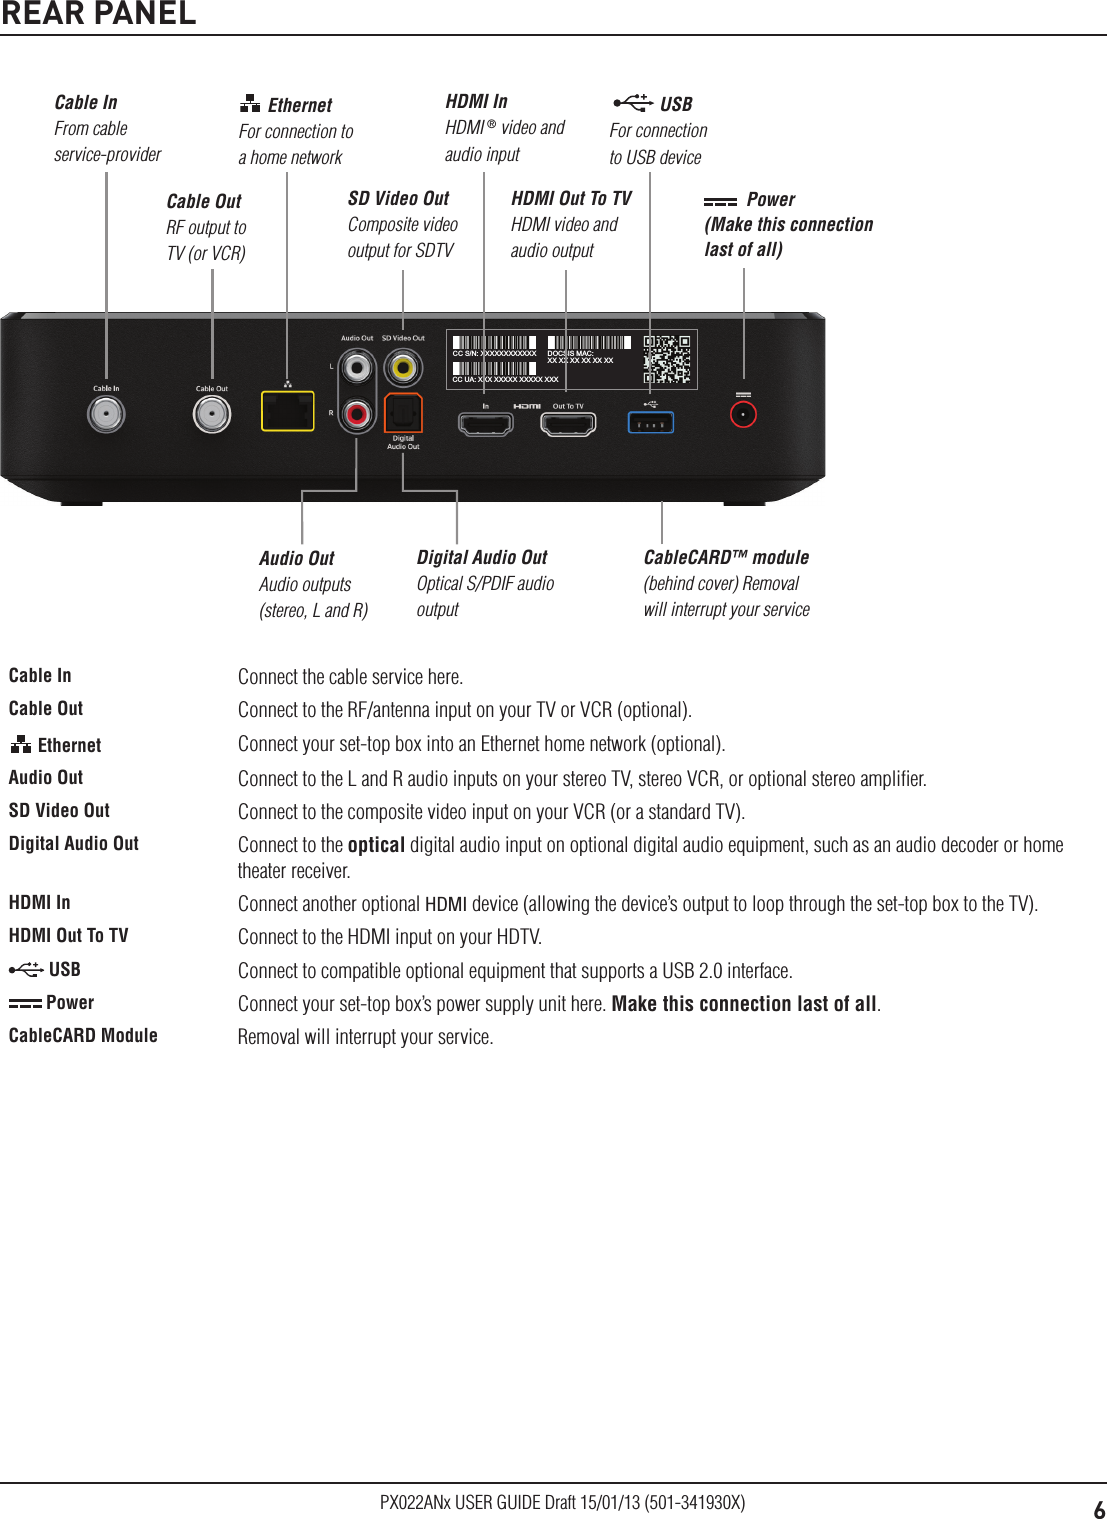 6PX022ANx USER GUIDE Draft 15/01/13 (501-341930X)CC S/N: XXXXXXXXXXXXCC UA: XXX XXXXX XXXXX XXXDOCSIS MAC:XX XX XX XX XX XXREAR PANELAudio Out Audio outputs (stereo, L and R)Cable In From cable service-provider  Power (Make this connection last of all)Digital Audio Out Optical S/PDIF audio output Ethernet For connection to a home networkHDMI Out To TV HDMI video and audio output   USB  For connection to USB deviceCableCARD™ module (behind cover) Removal will interrupt your serviceCable Out RF output to TV (or VCR)HDMI In HDMI ® video and audio inputSD Video Out Composite video output for SDTVCable In Connect the cable service here. Cable Out Connect to the RF/antenna input on your TV or VCR (optional). Ethernet  Connect your set-top box into an Ethernet home network (optional).Audio Out Connect to the L and R audio inputs on your stereo TV, stereo VCR, or optional stereo ampliﬁer.SD Video Out Connect to the composite video input on your VCR (or a standard TV).Digital Audio Out Connect to the optical digital audio input on optional digital audio equipment, such as an audio decoder or home theater receiver.HDMI In Connect another optional HDMI device (allowing the device’s output to loop through the set-top box to the TV).HDMI Out To TV Connect to the HDMI input on your HDTV. USB Connect to compatible optional equipment that supports a USB 2.0 interface. Power Connect your set-top box’s power supply unit here. Make this connection last of all.CableCARD Module Removal will interrupt your service.